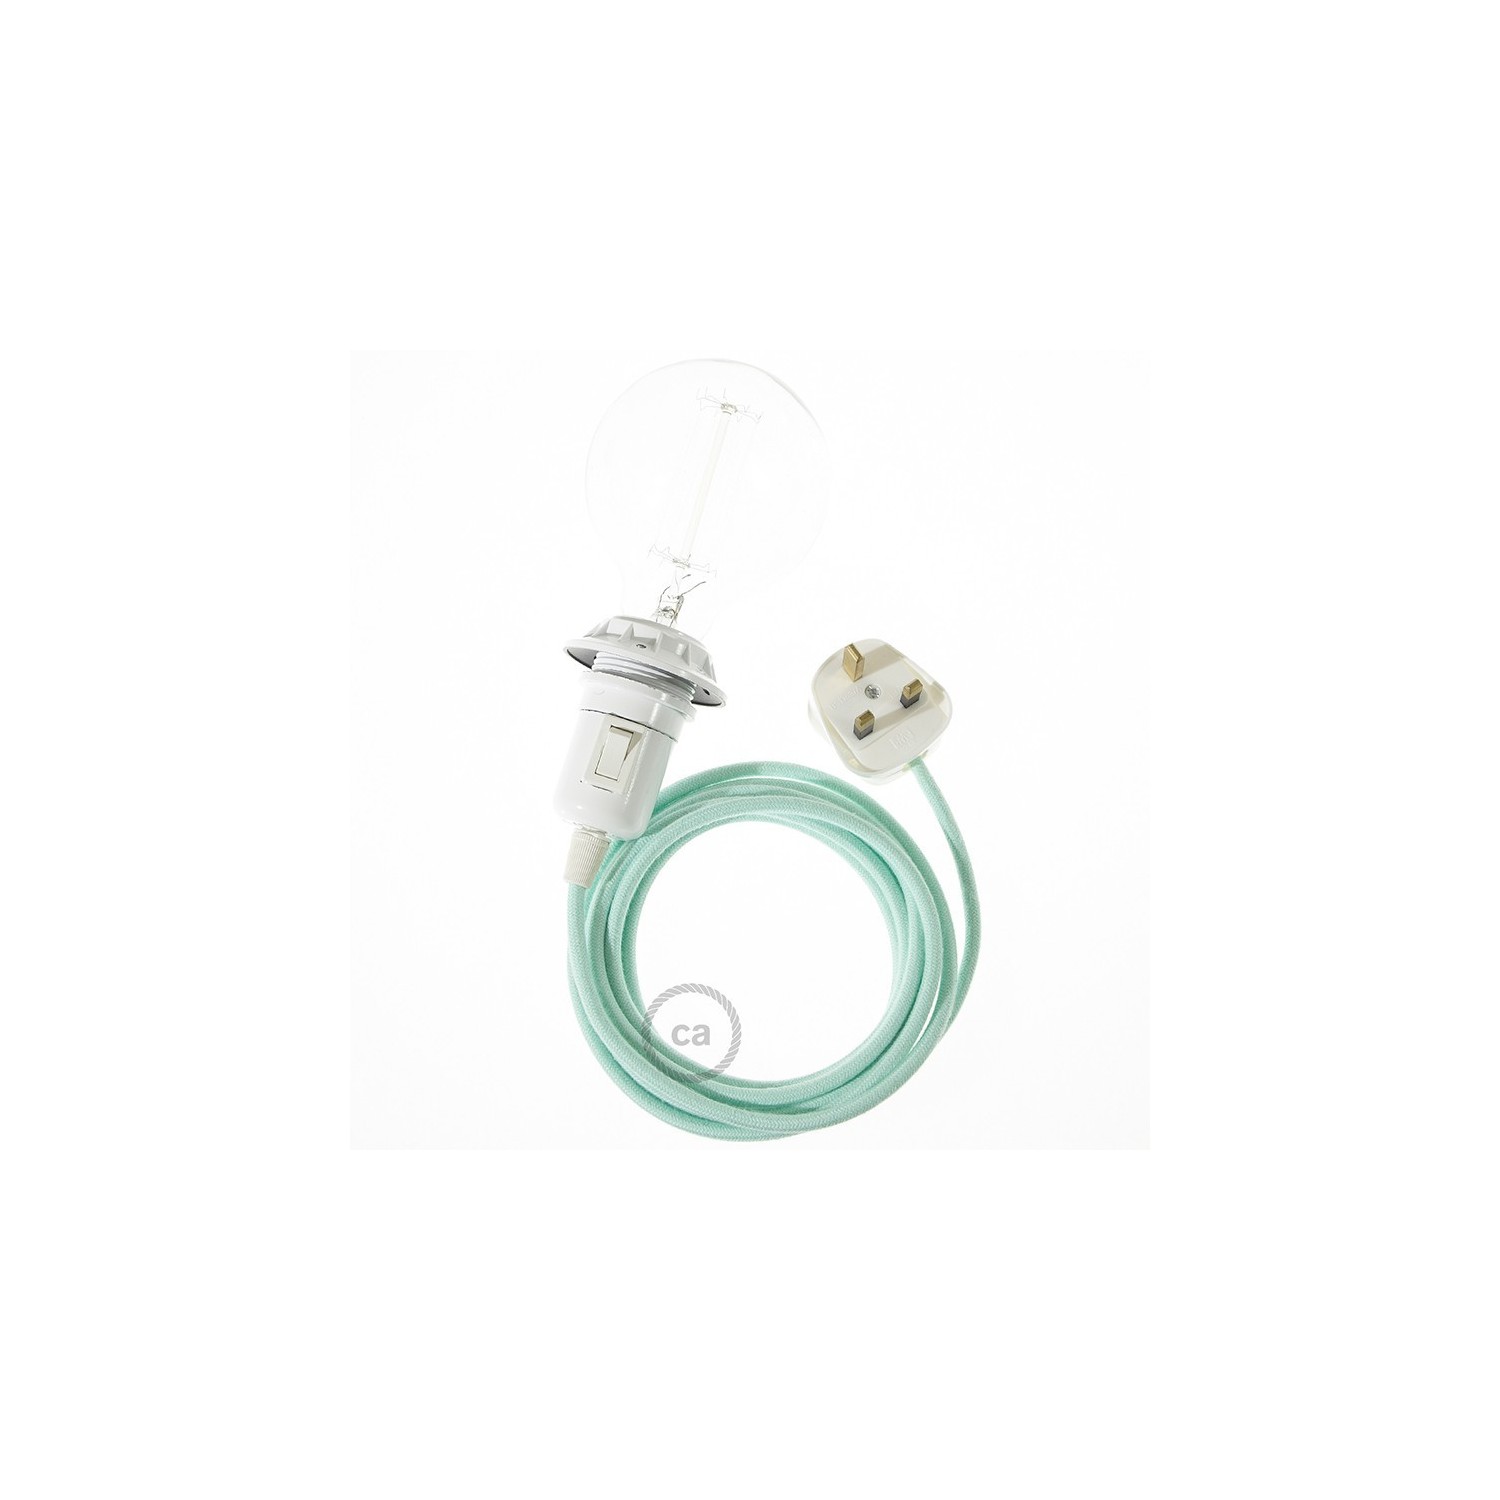 Create your RC34 Milk and Mint Cotton Snake for lampshade and bring the light wherever you want.